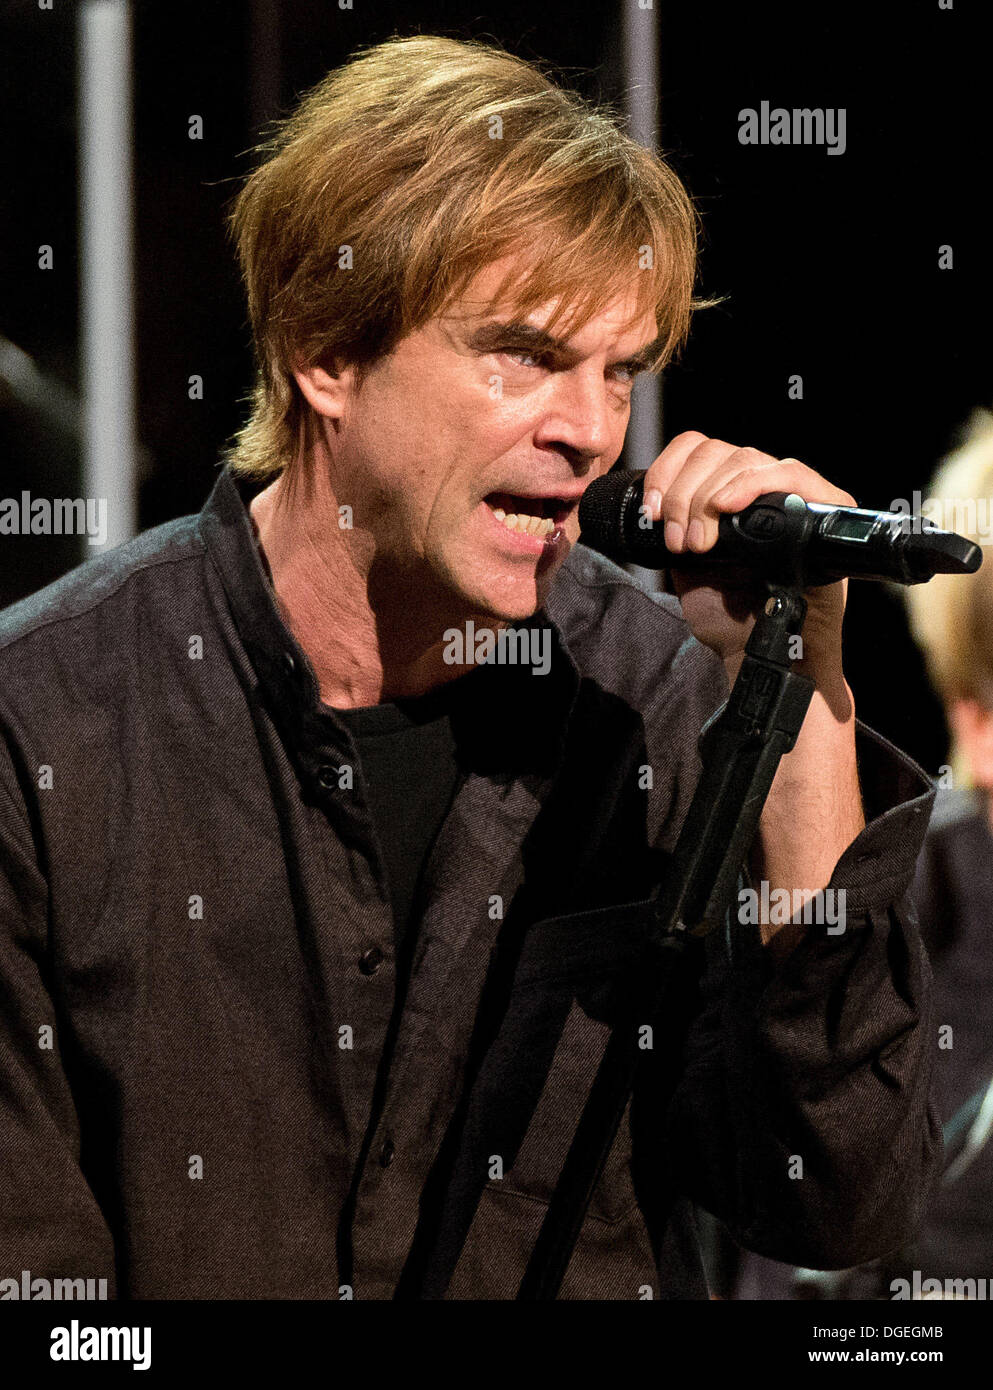 Singer of the German punk rock band 'Die Toten Hosen', Campino, performs  onstage at the Tonhalle Duesseldorf, in Duesseldorf, Germany, 19 October  2013. The band is playing three memorial concerts with the